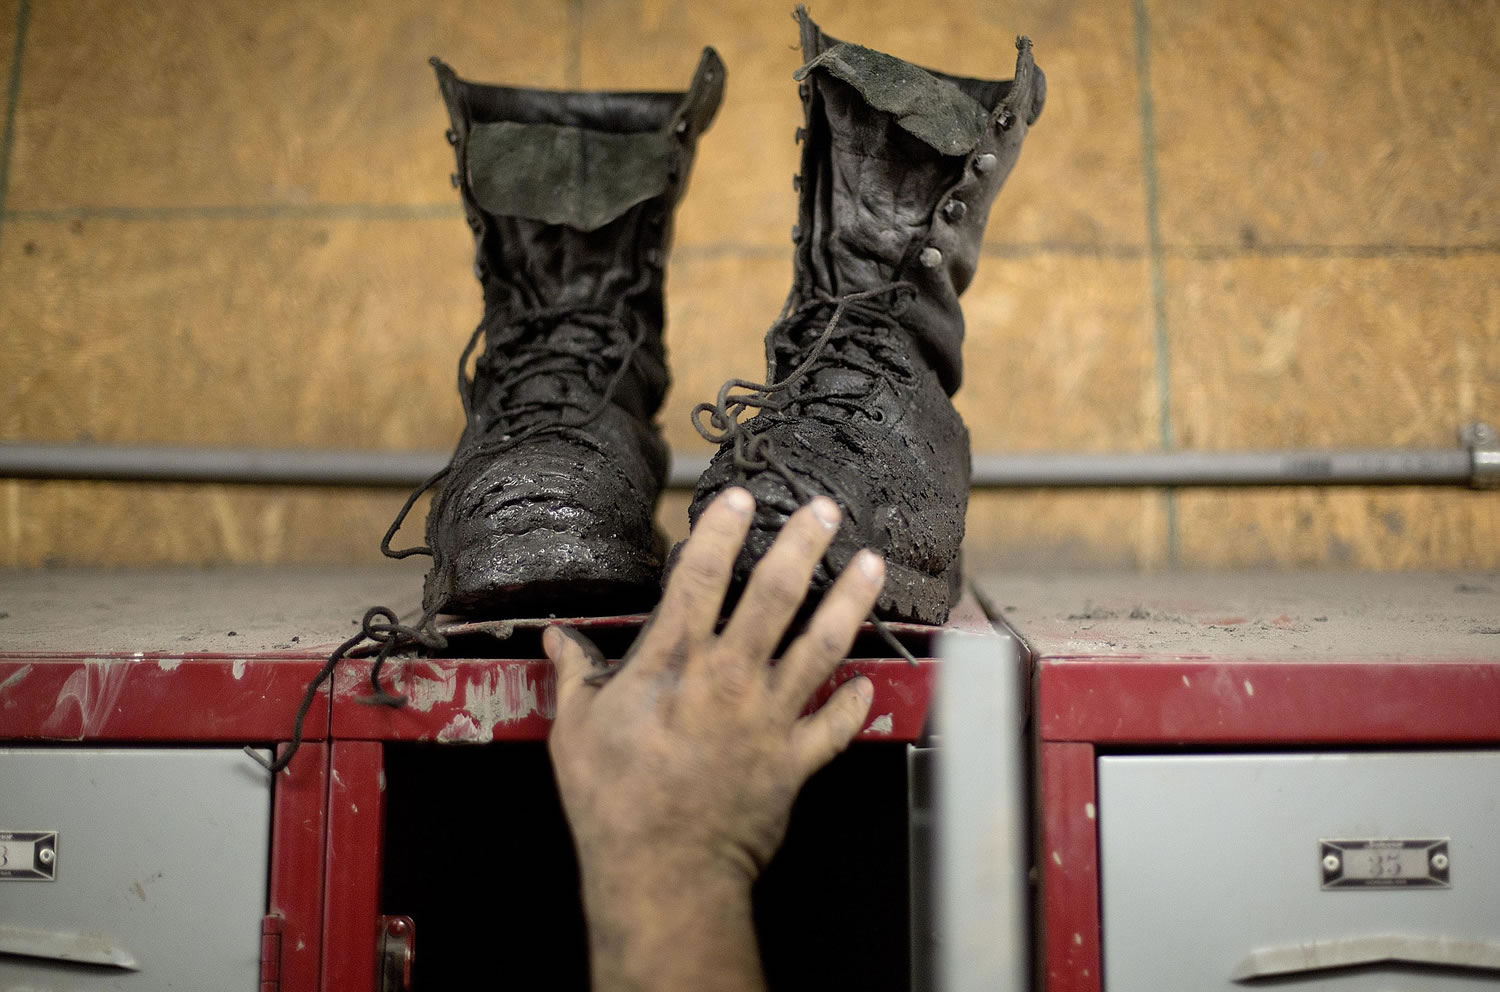 Coal miner Johnny Turner, 35, puts his coal boots on top of his locker after finishing a shift at the Perkins Branch coal mine in Cumberland, Ky., on Oct. 15.